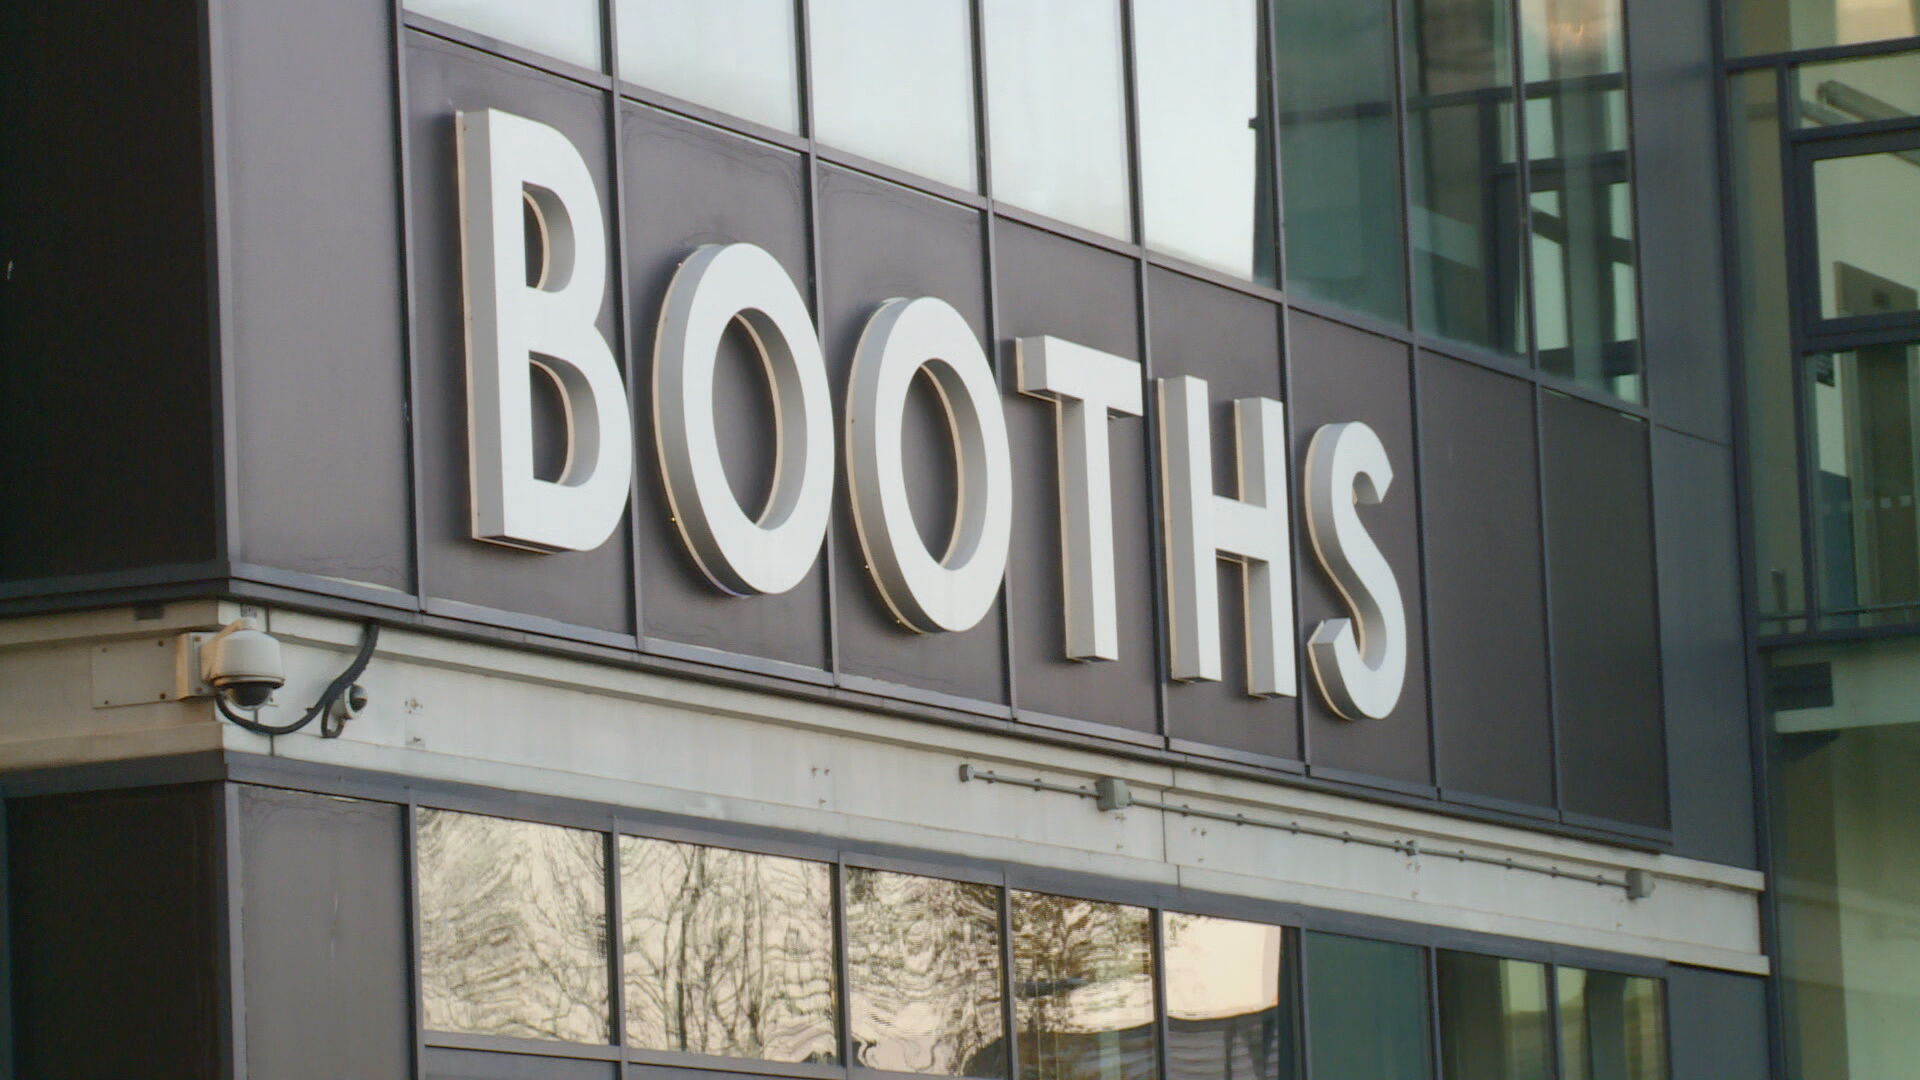 Booths Clitheroe Opening Hours & Directions